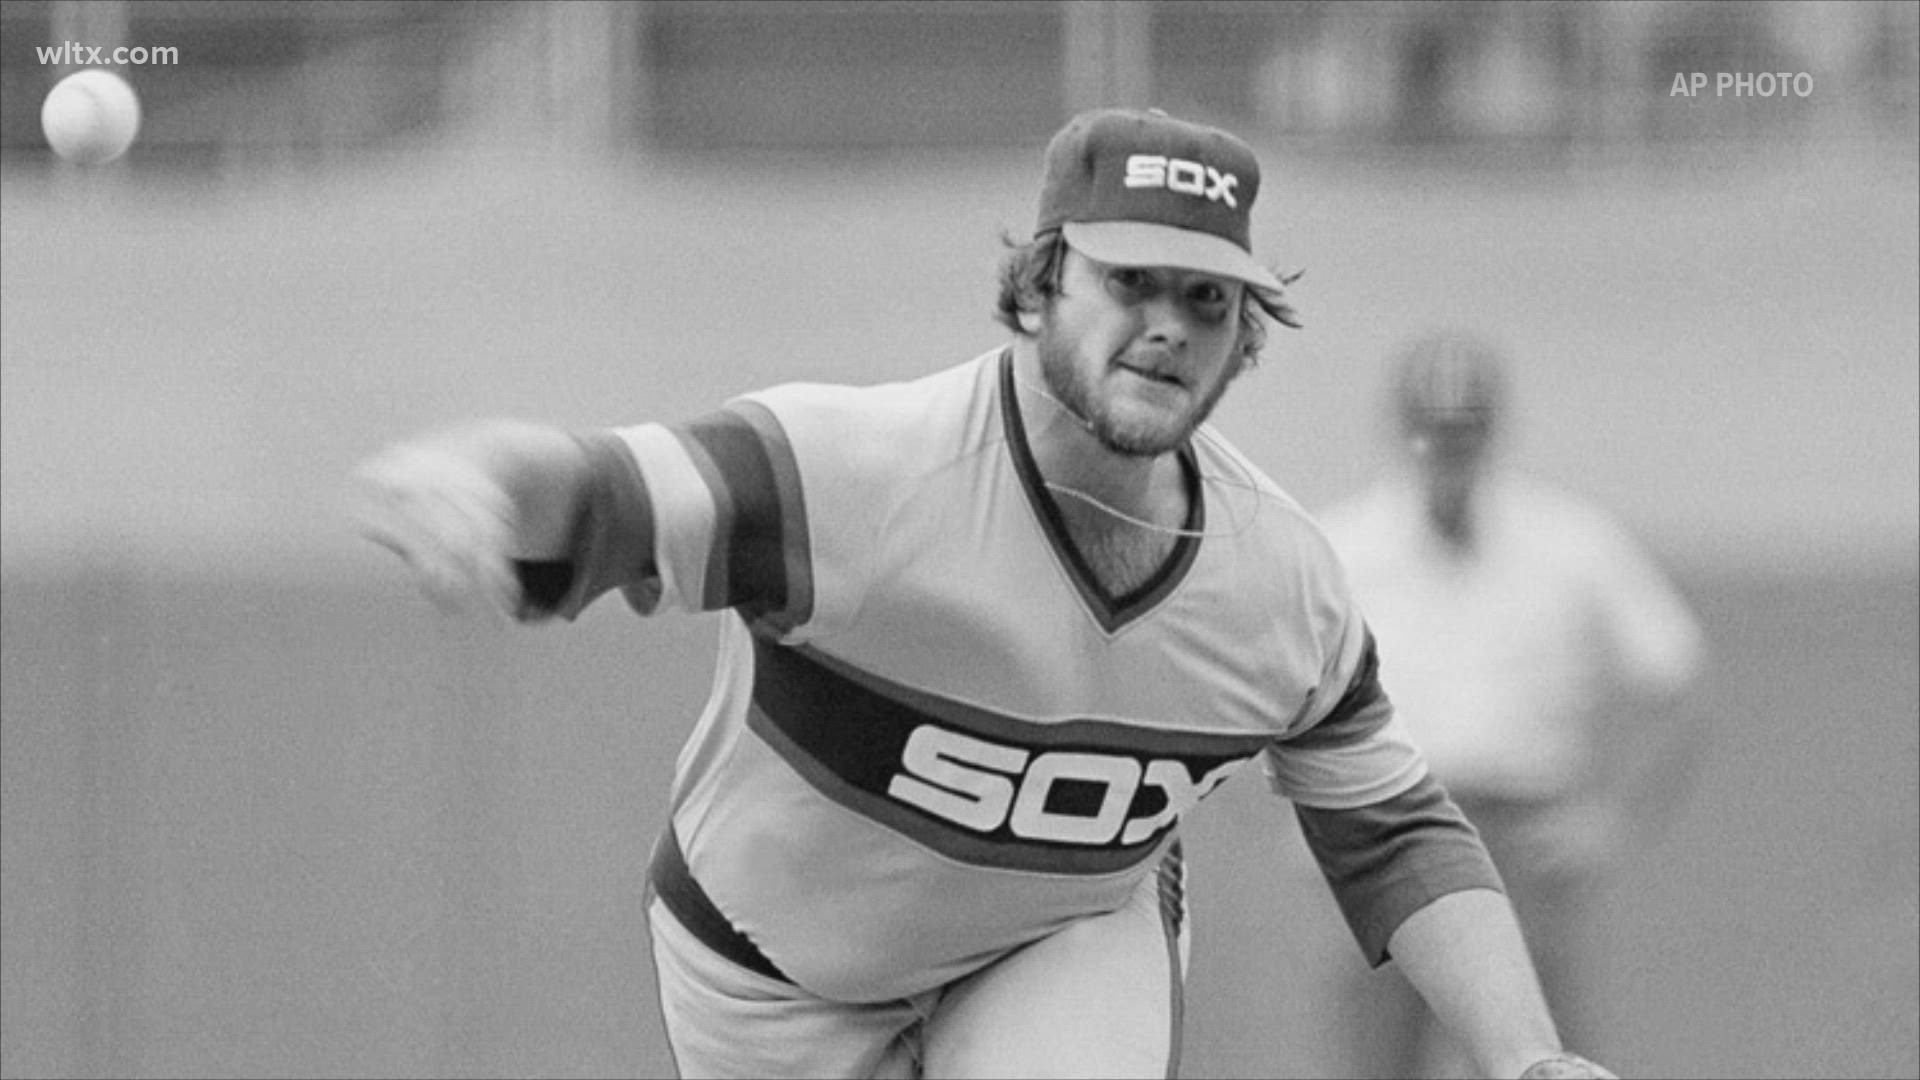 LaMarr Hoyt, who won the 1983 AL Cy Young Award with the Chicago White Sox, has died. He was 66.